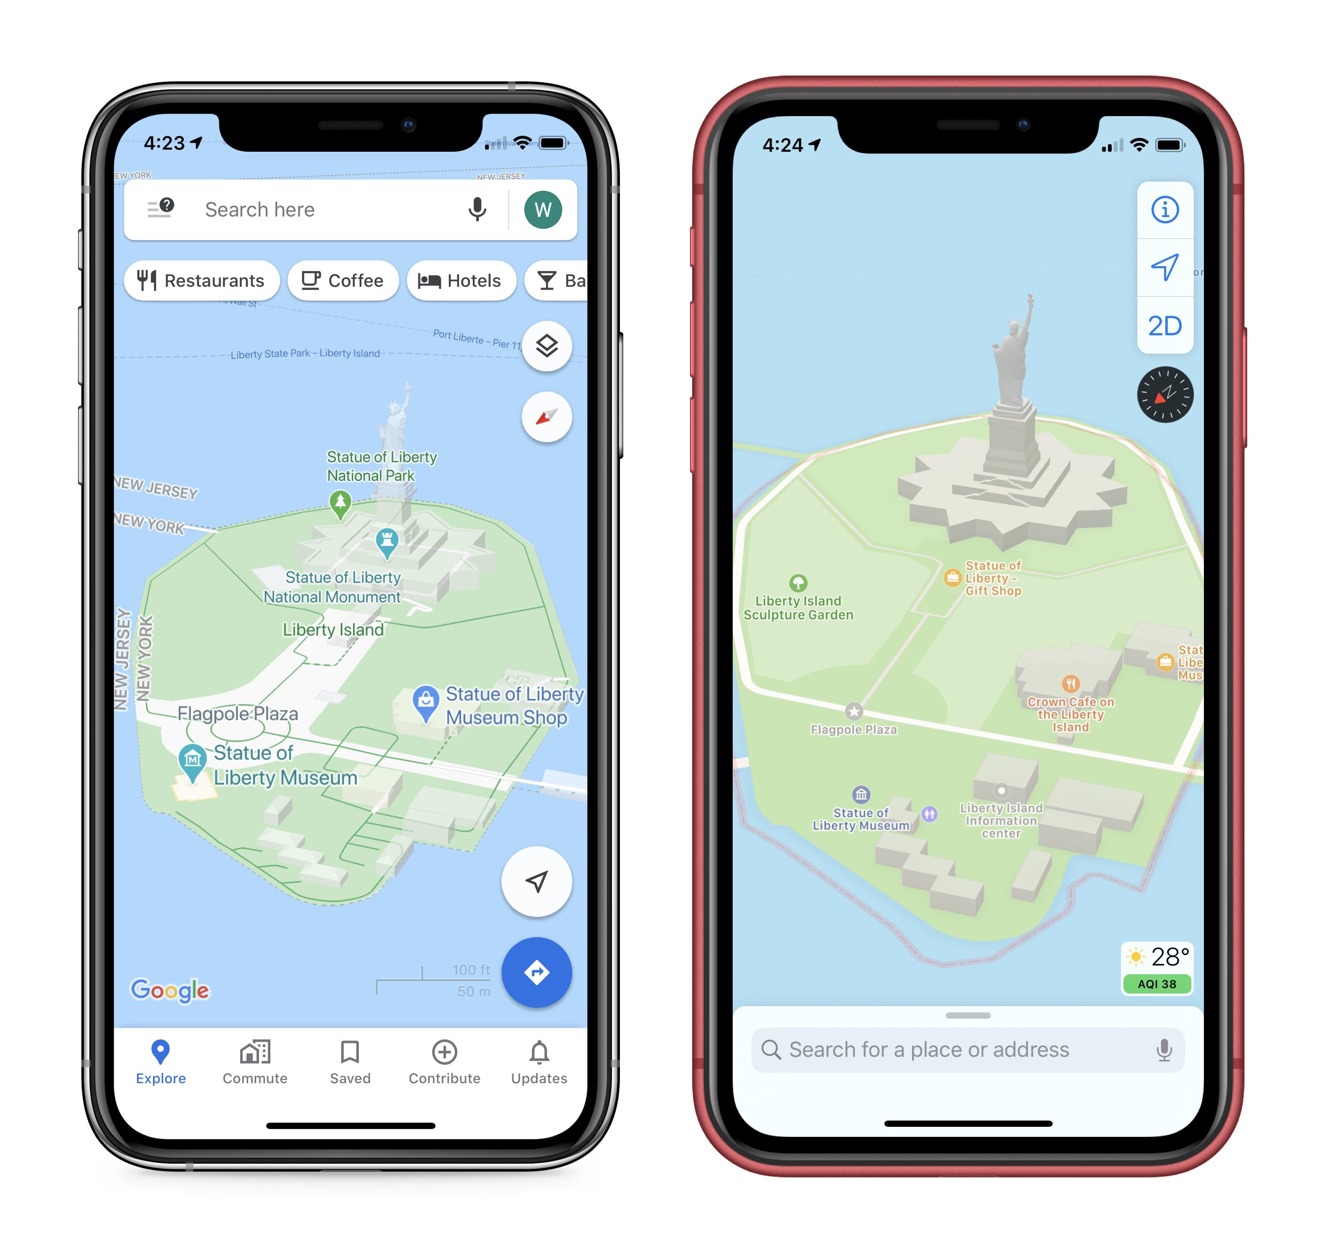 Google Maps shows walkways better, while Apple Maps iconography and colors make each location distinct